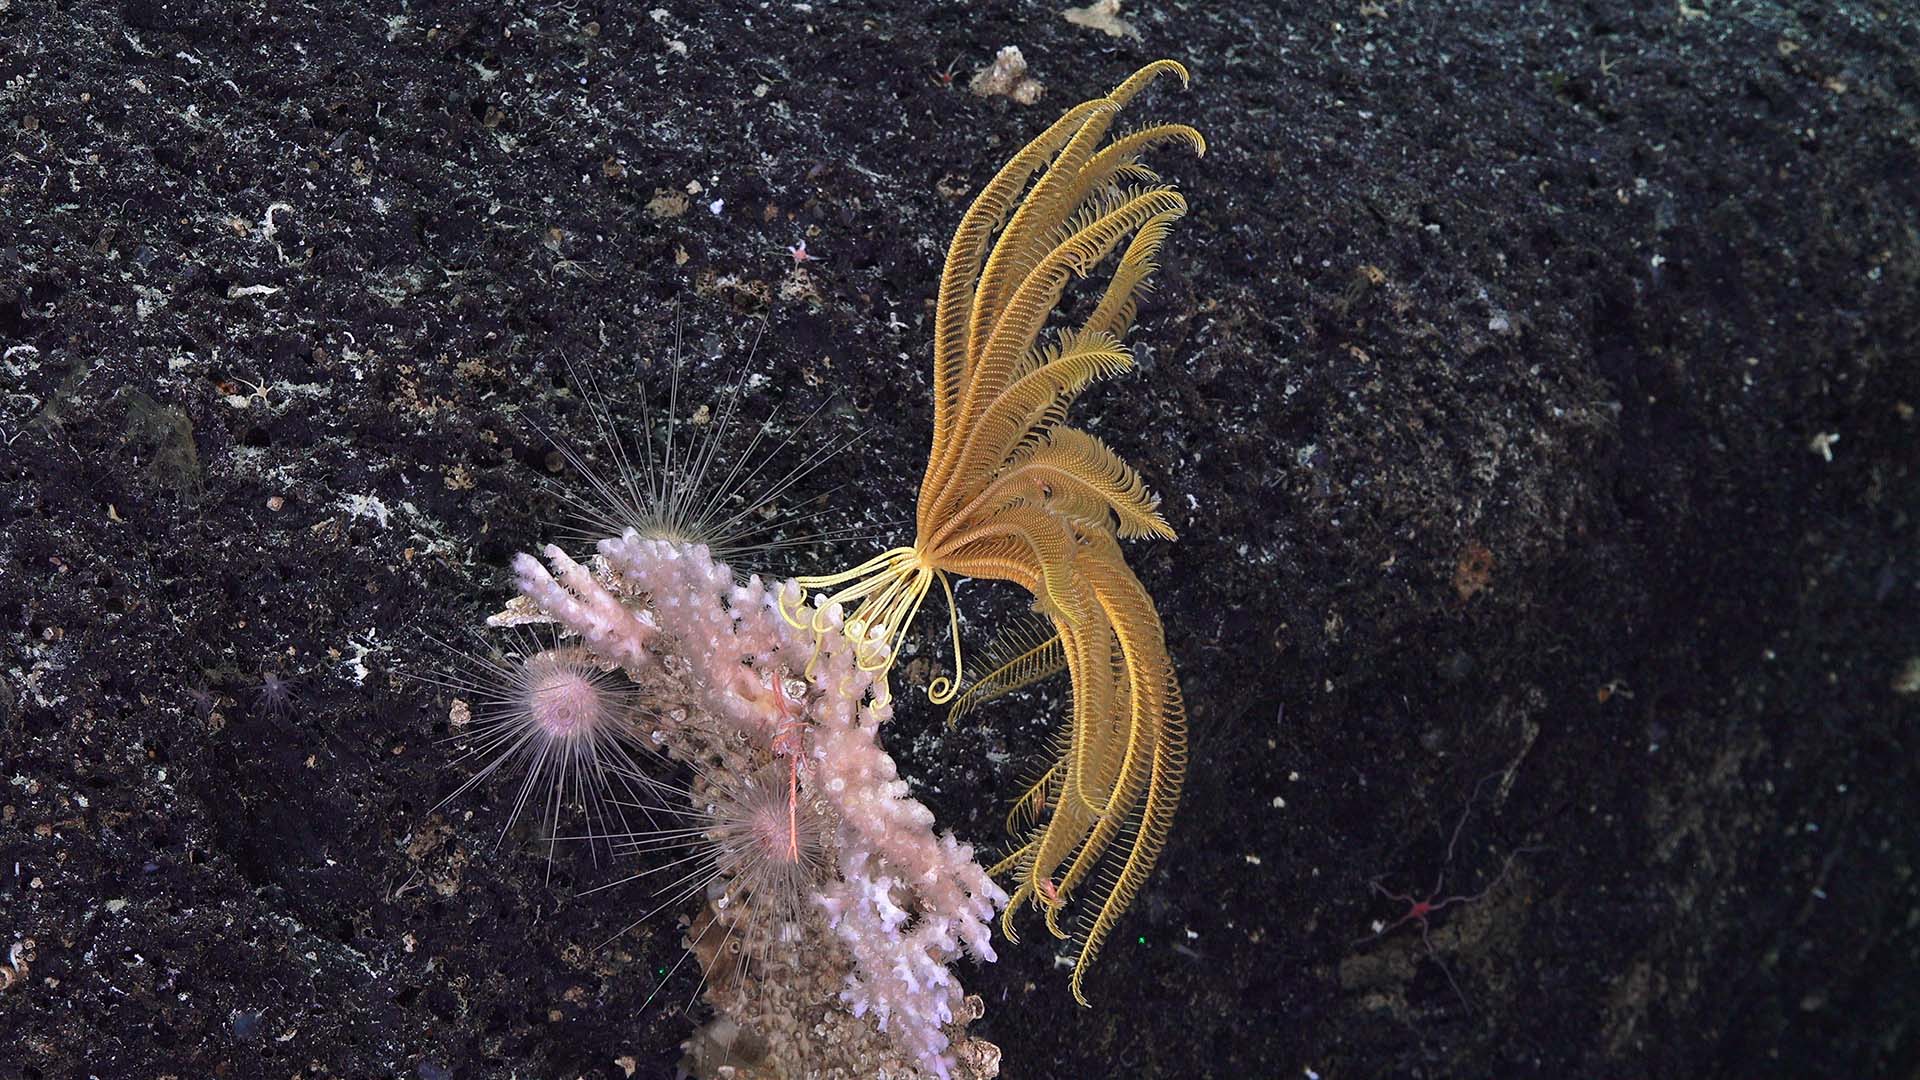 A sea lily or crinoid (one element of the symbiotic pair mentioned below) is spotted clinging to deep-sea coral on a 2017 expedition to the Phoenix Islands Protected Area. (Photo courtesy of Tim Shank, © Woods Hole Oceanographic Institution)